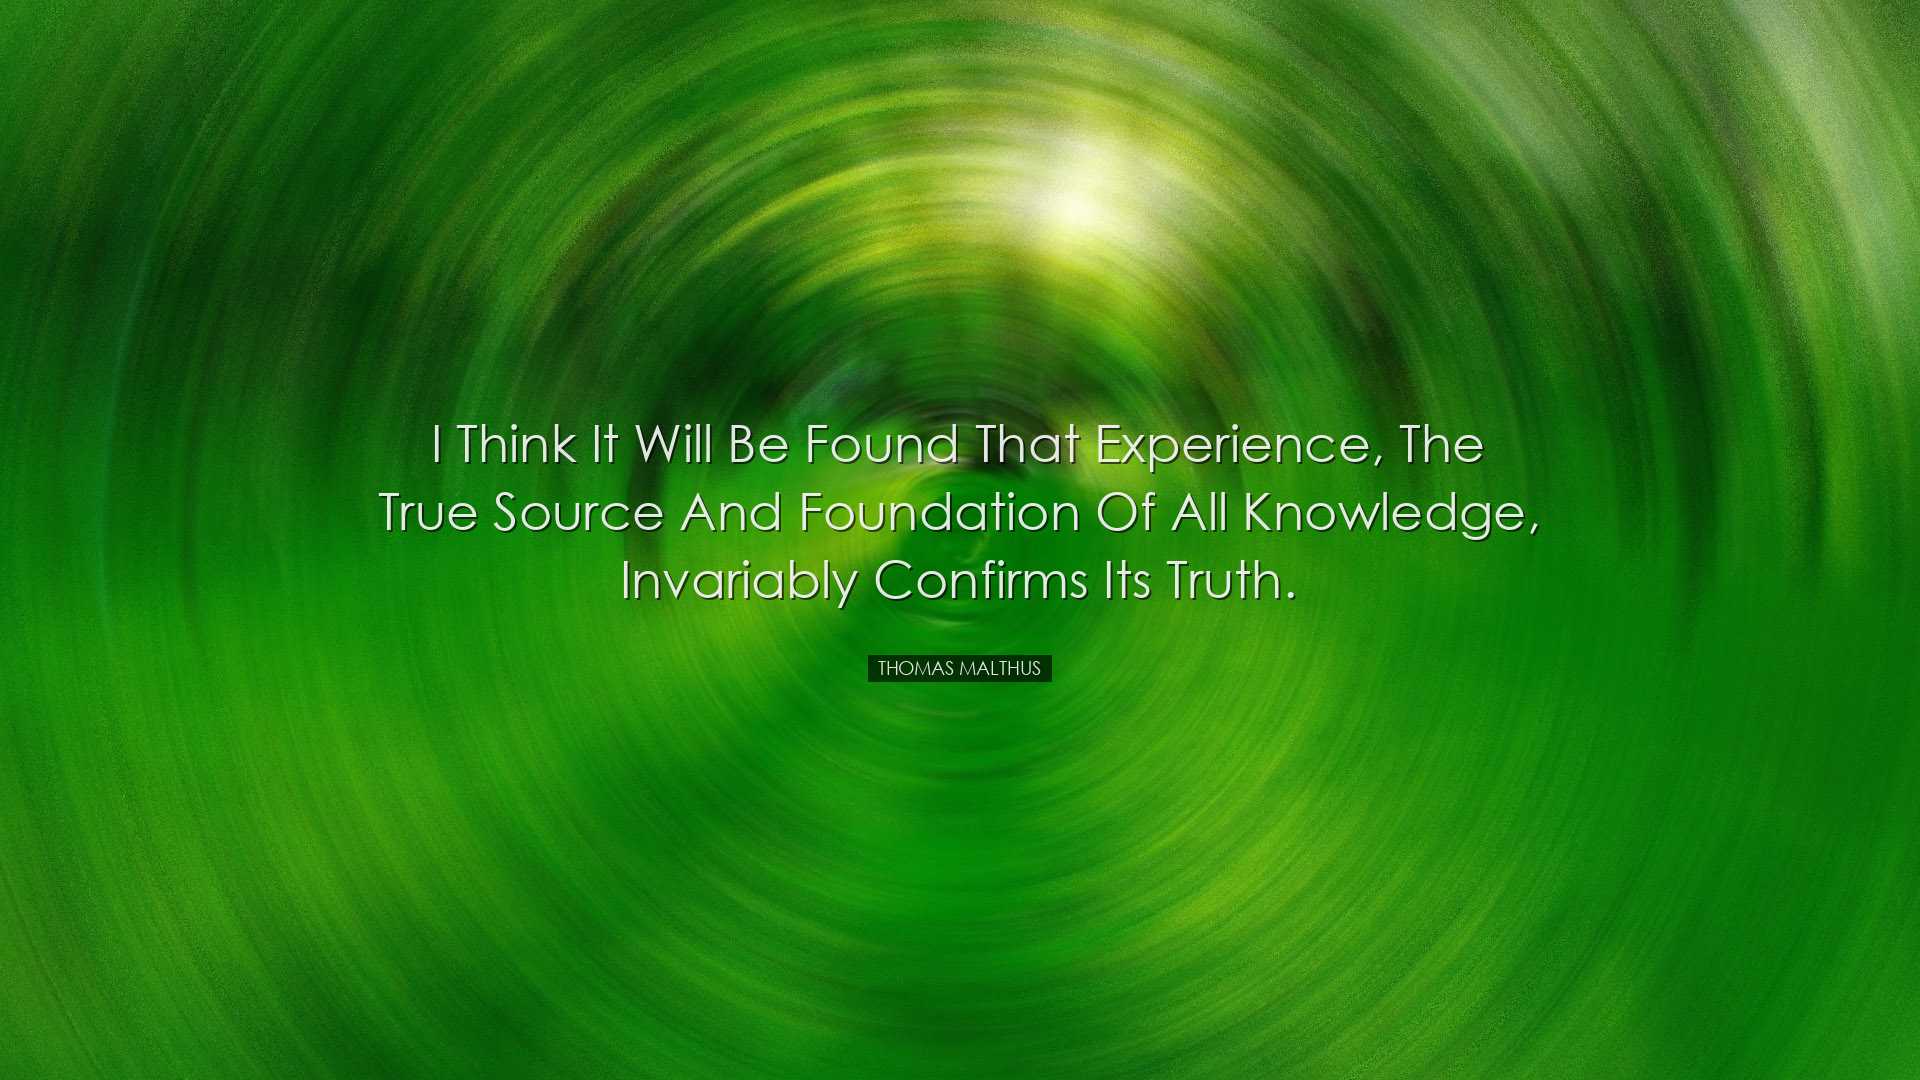 I think it will be found that experience, the true source and foun